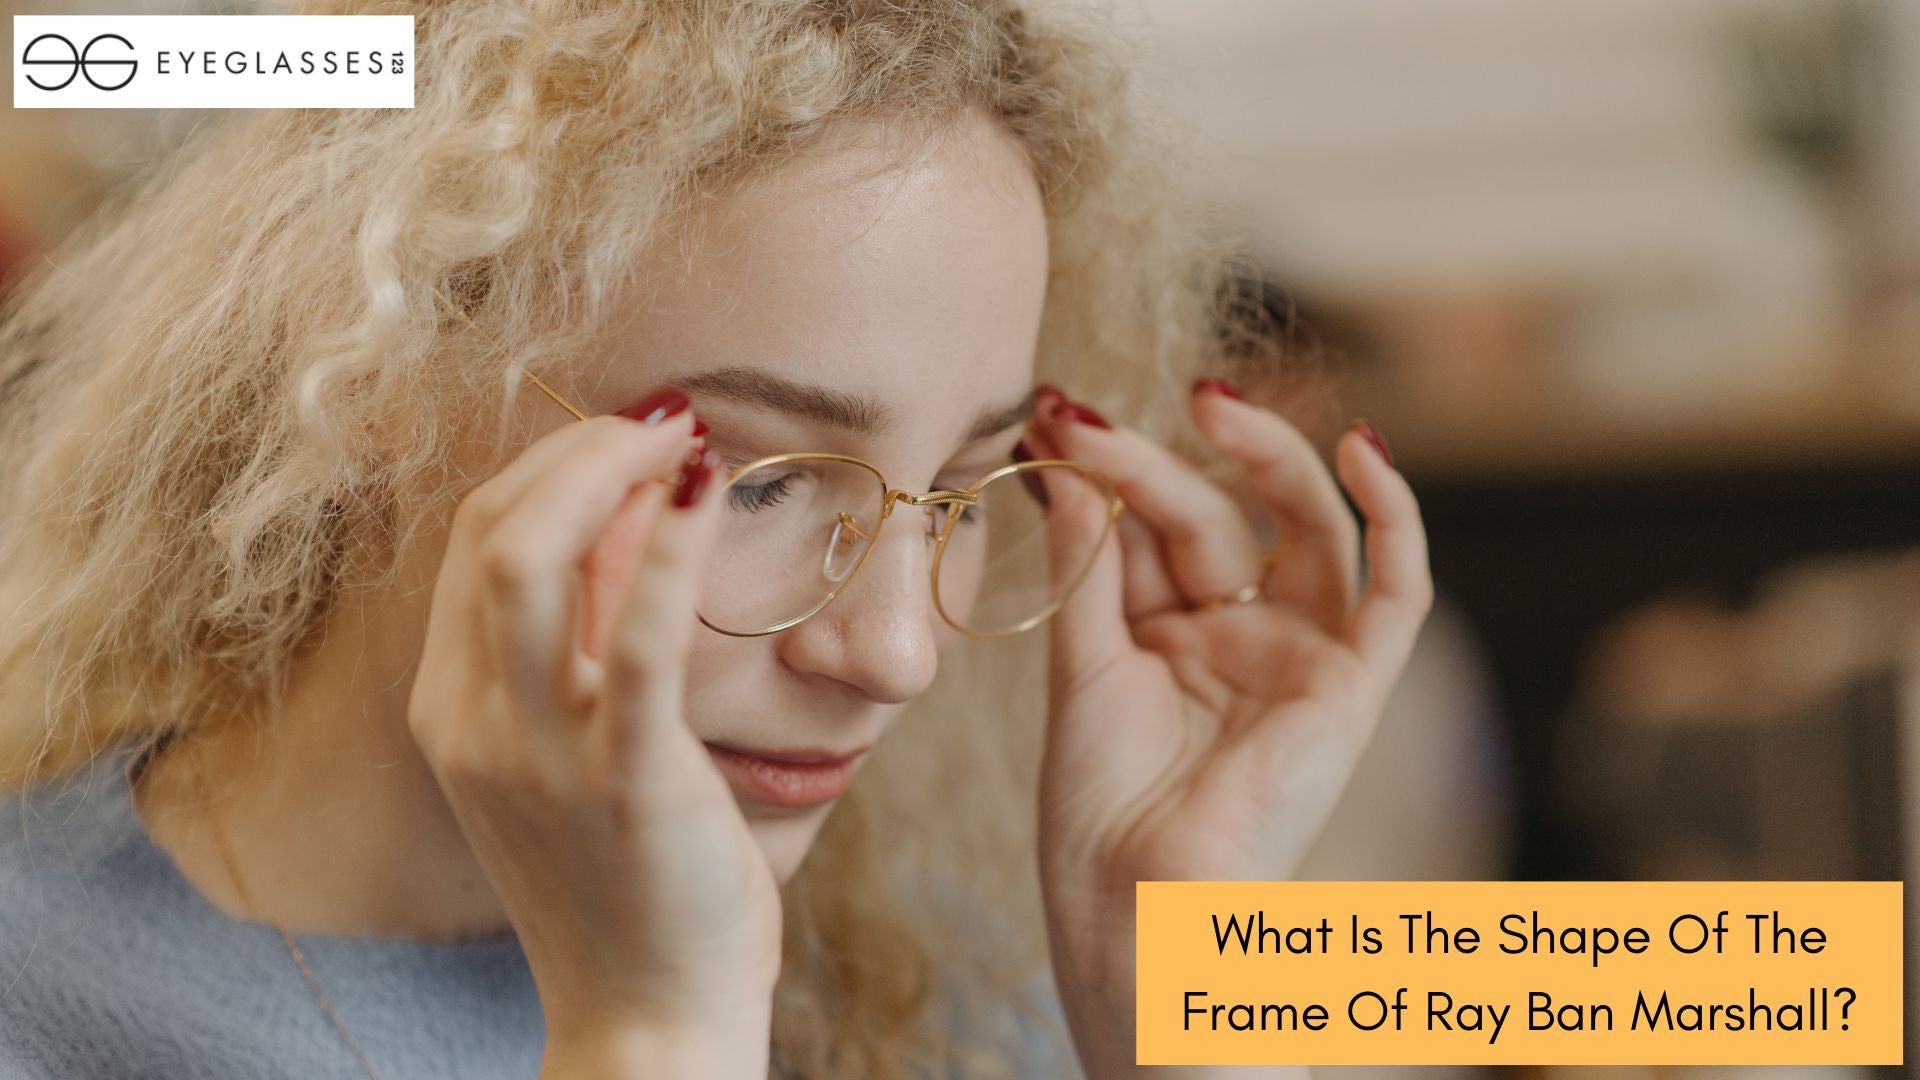 What Is The Shape Of The Frame Of Ray Ban Marshall?